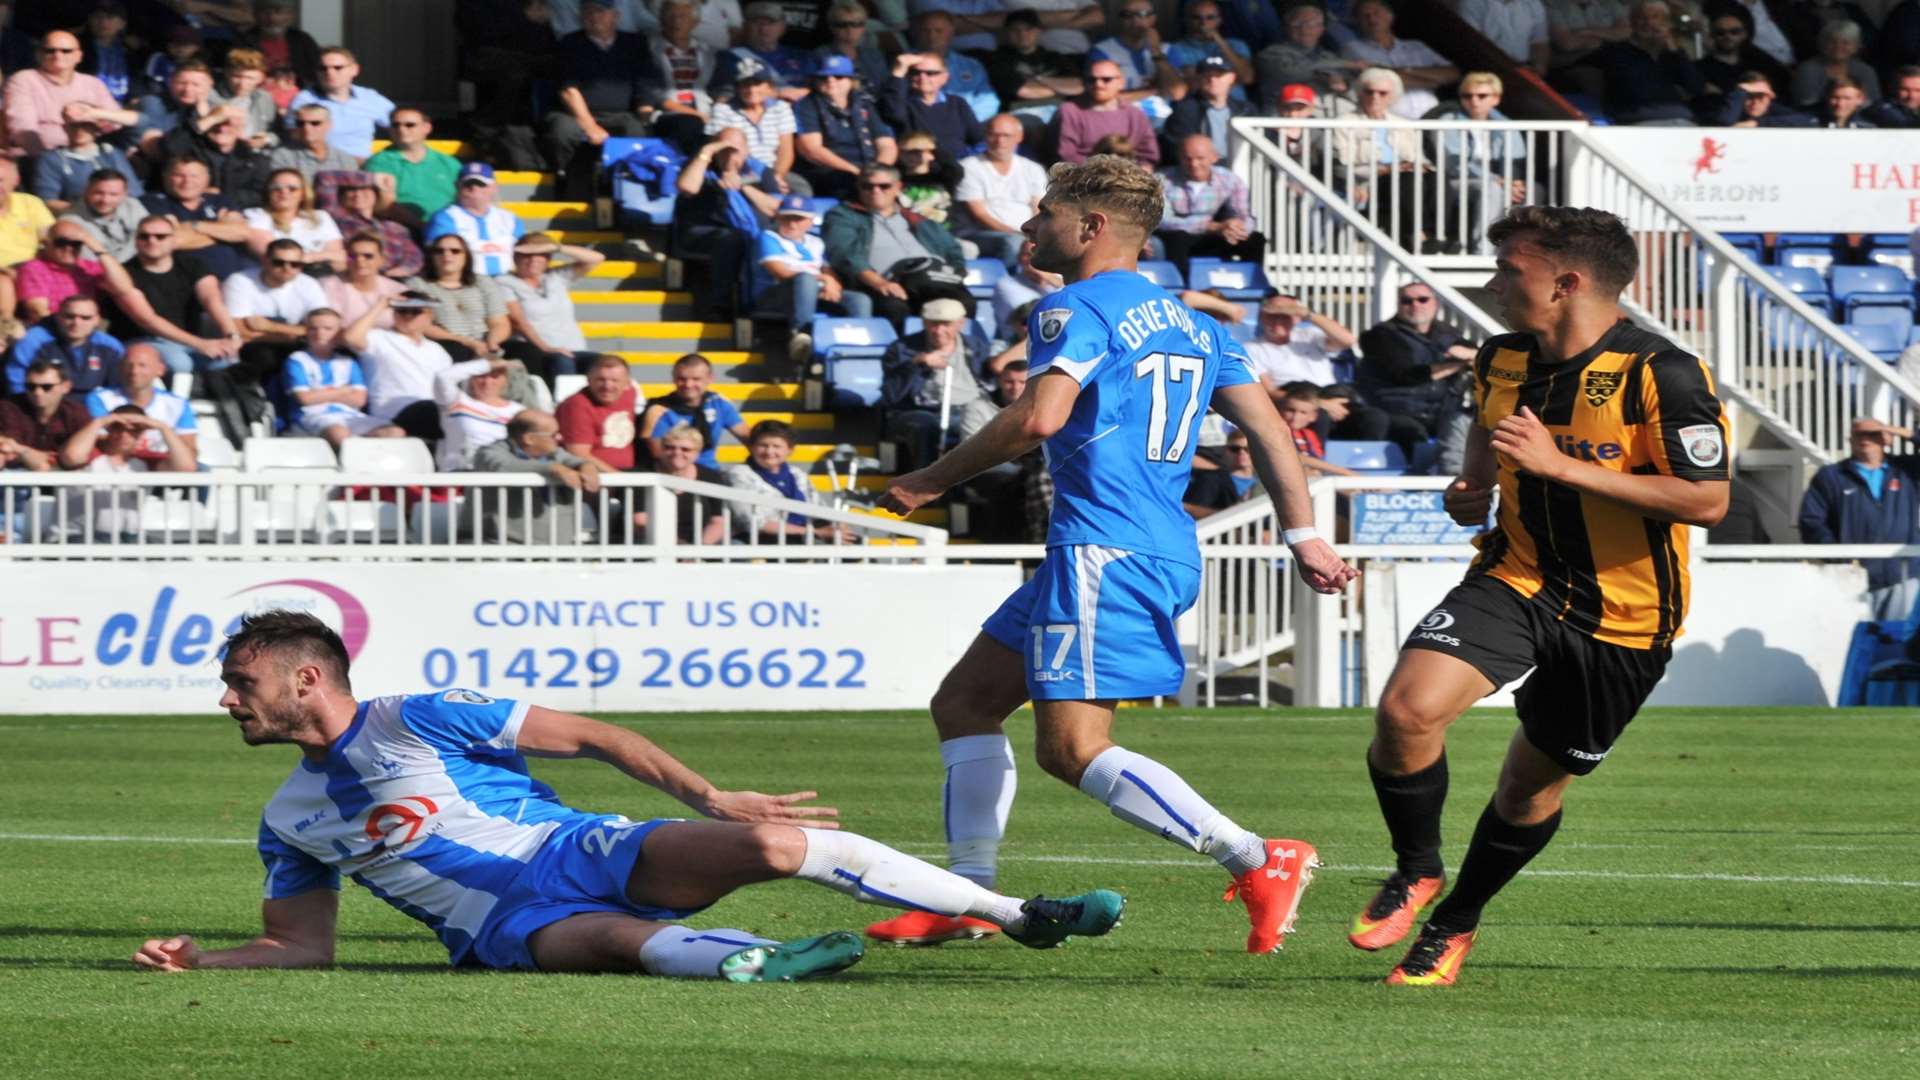 Johan ter Horst scores his first Maidstone goal up at Hartlepool Picture: Steve Terrell